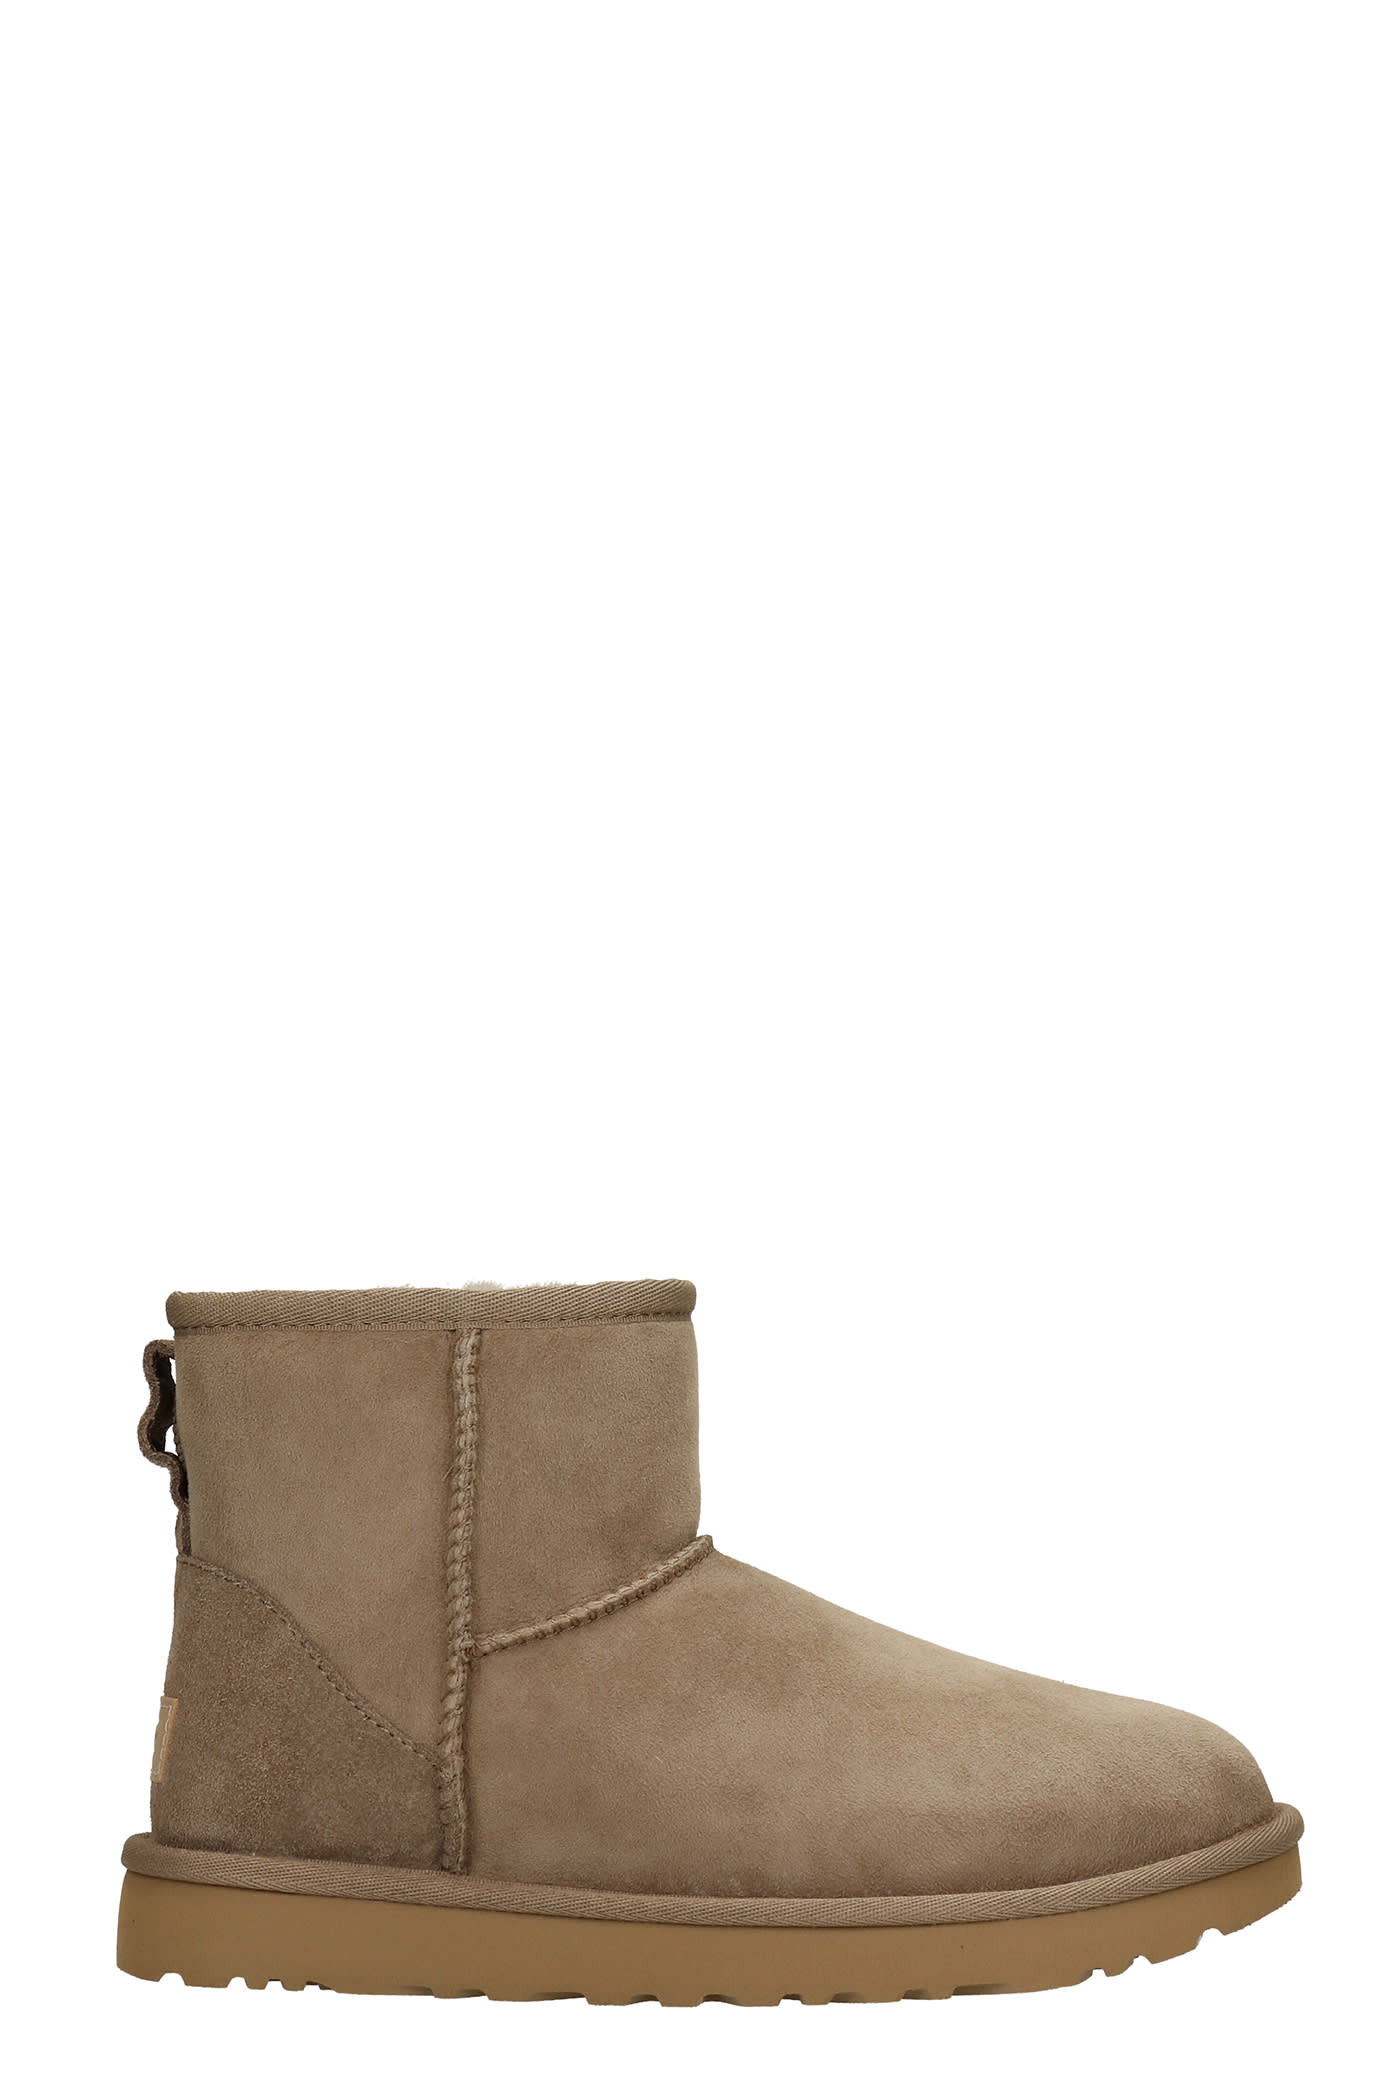 UGG Mini Classic Ii Low Heels Ankle Boots In Taupe Suede